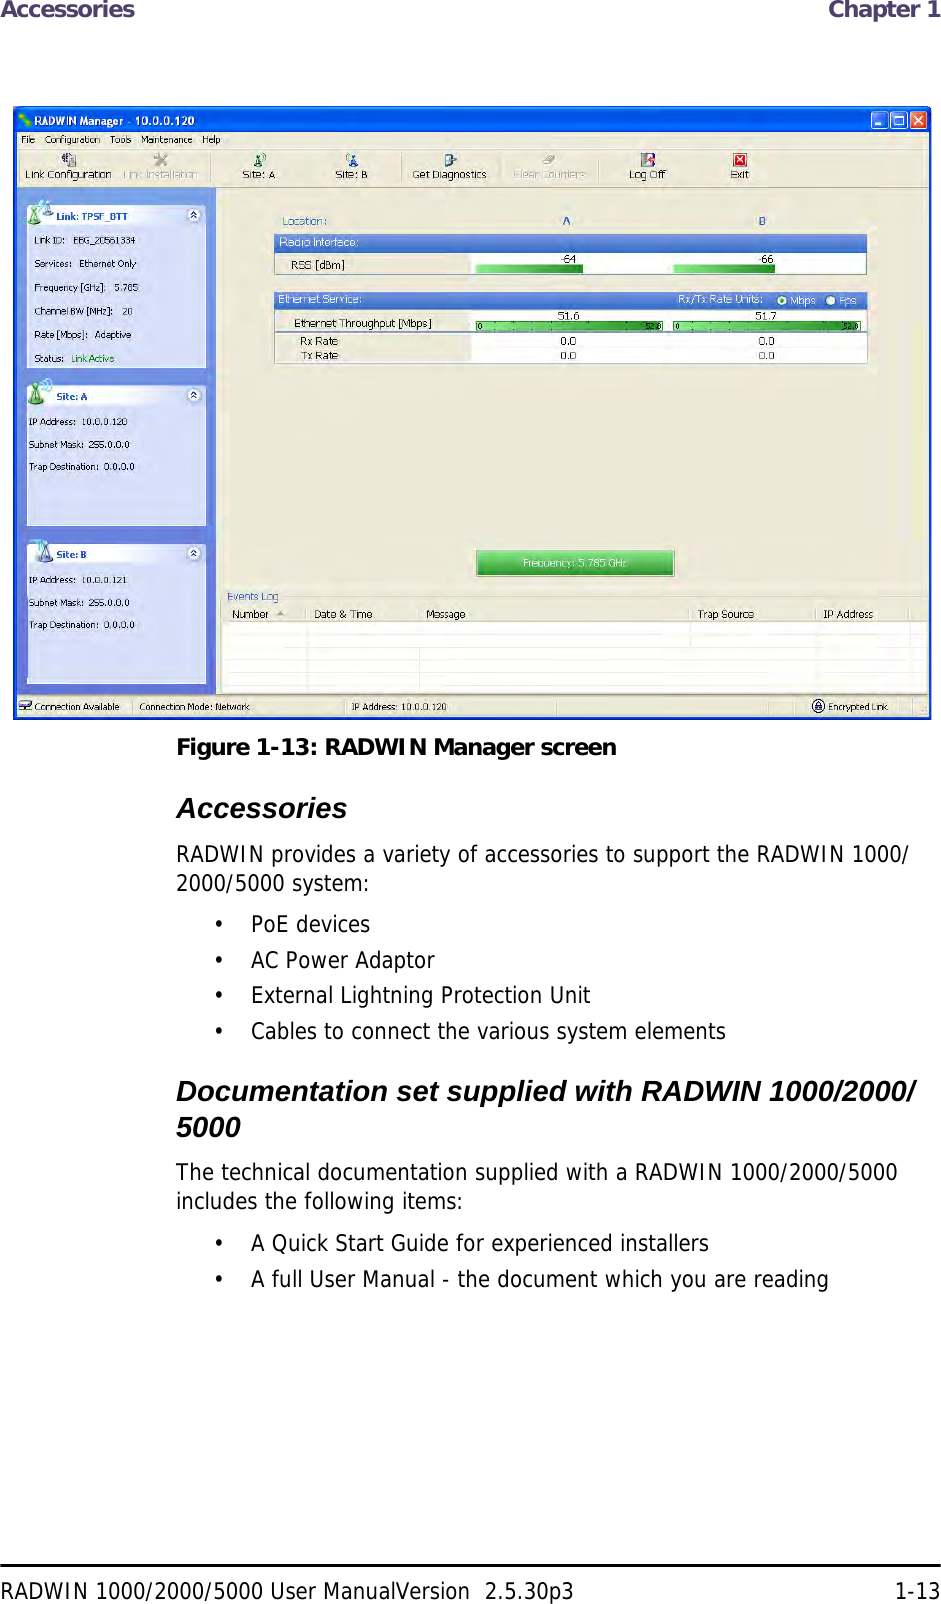 Accessories  Chapter 1RADWIN 1000/2000/5000 User ManualVersion  2.5.30p3 1-13Figure 1-13: RADWIN Manager screenAccessoriesRADWIN provides a variety of accessories to support the RADWIN 1000/2000/5000 system:• PoE devices• AC Power Adaptor• External Lightning Protection Unit• Cables to connect the various system elementsDocumentation set supplied with RADWIN 1000/2000/5000The technical documentation supplied with a RADWIN 1000/2000/5000 includes the following items:• A Quick Start Guide for experienced installers• A full User Manual - the document which you are reading